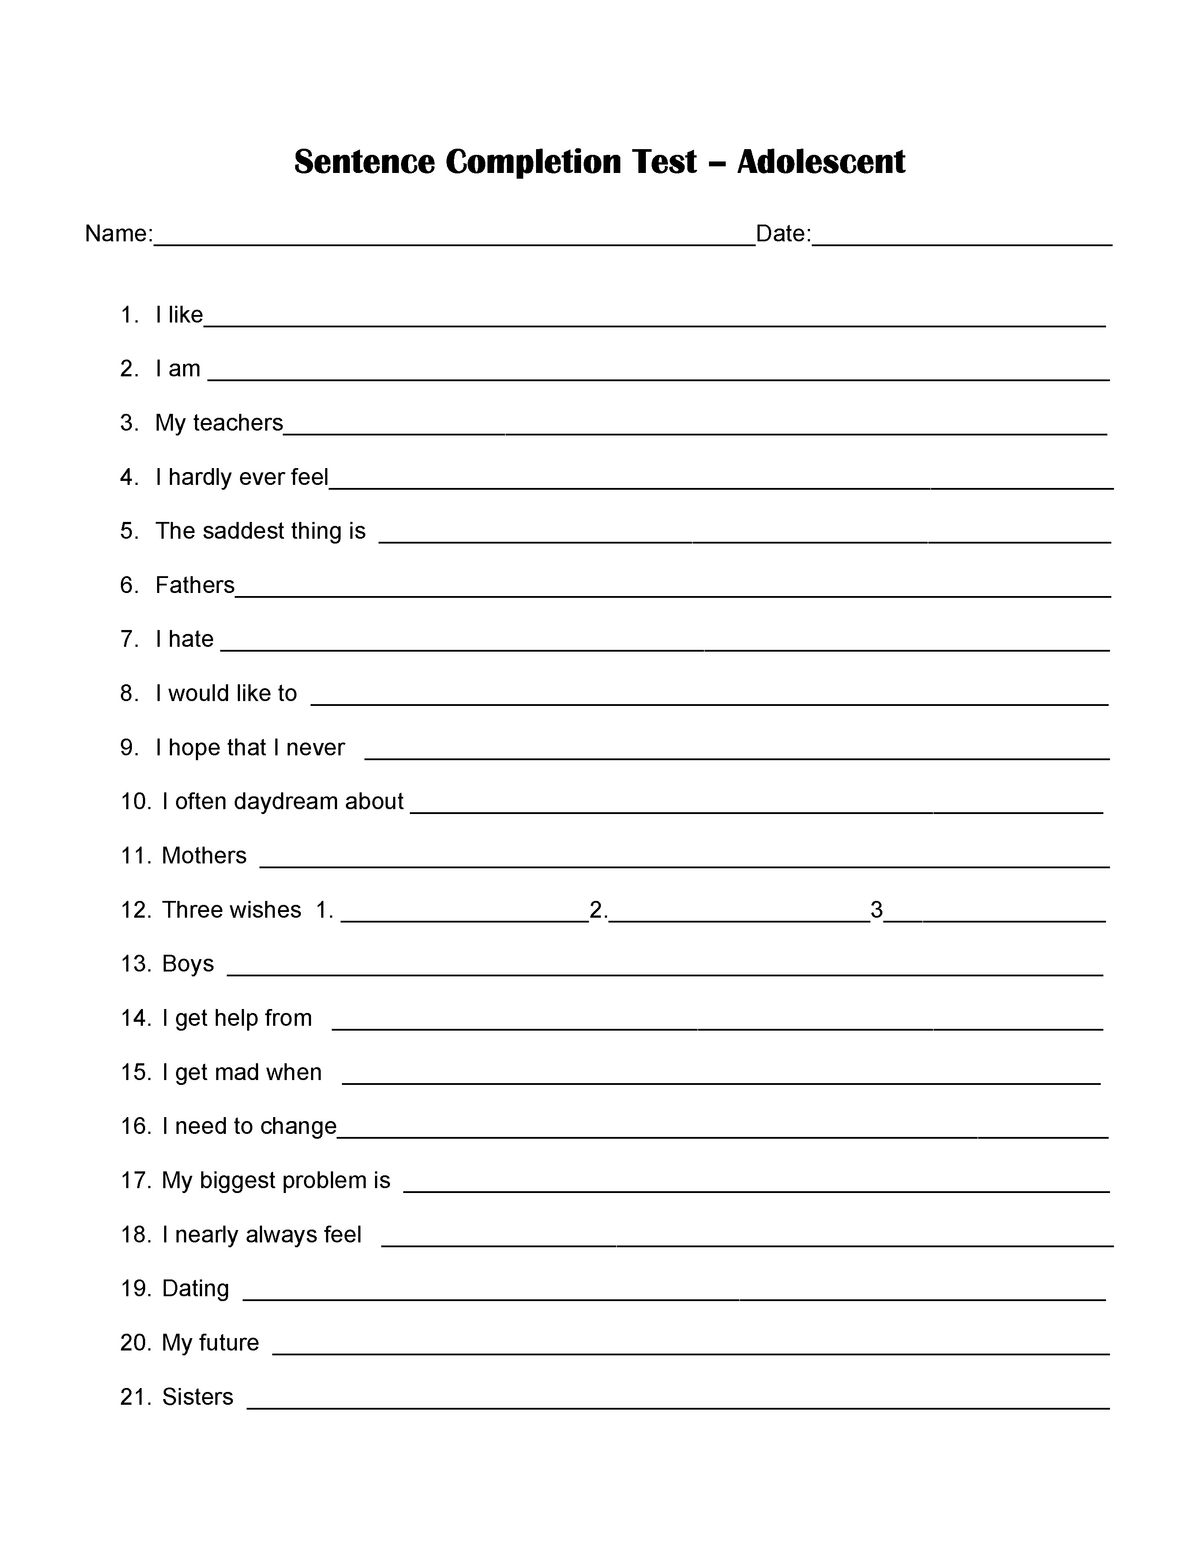 sentence-completion-worksheets-for-adults-questionnaire-pletion-worksheet-sentence-grief-in-2020